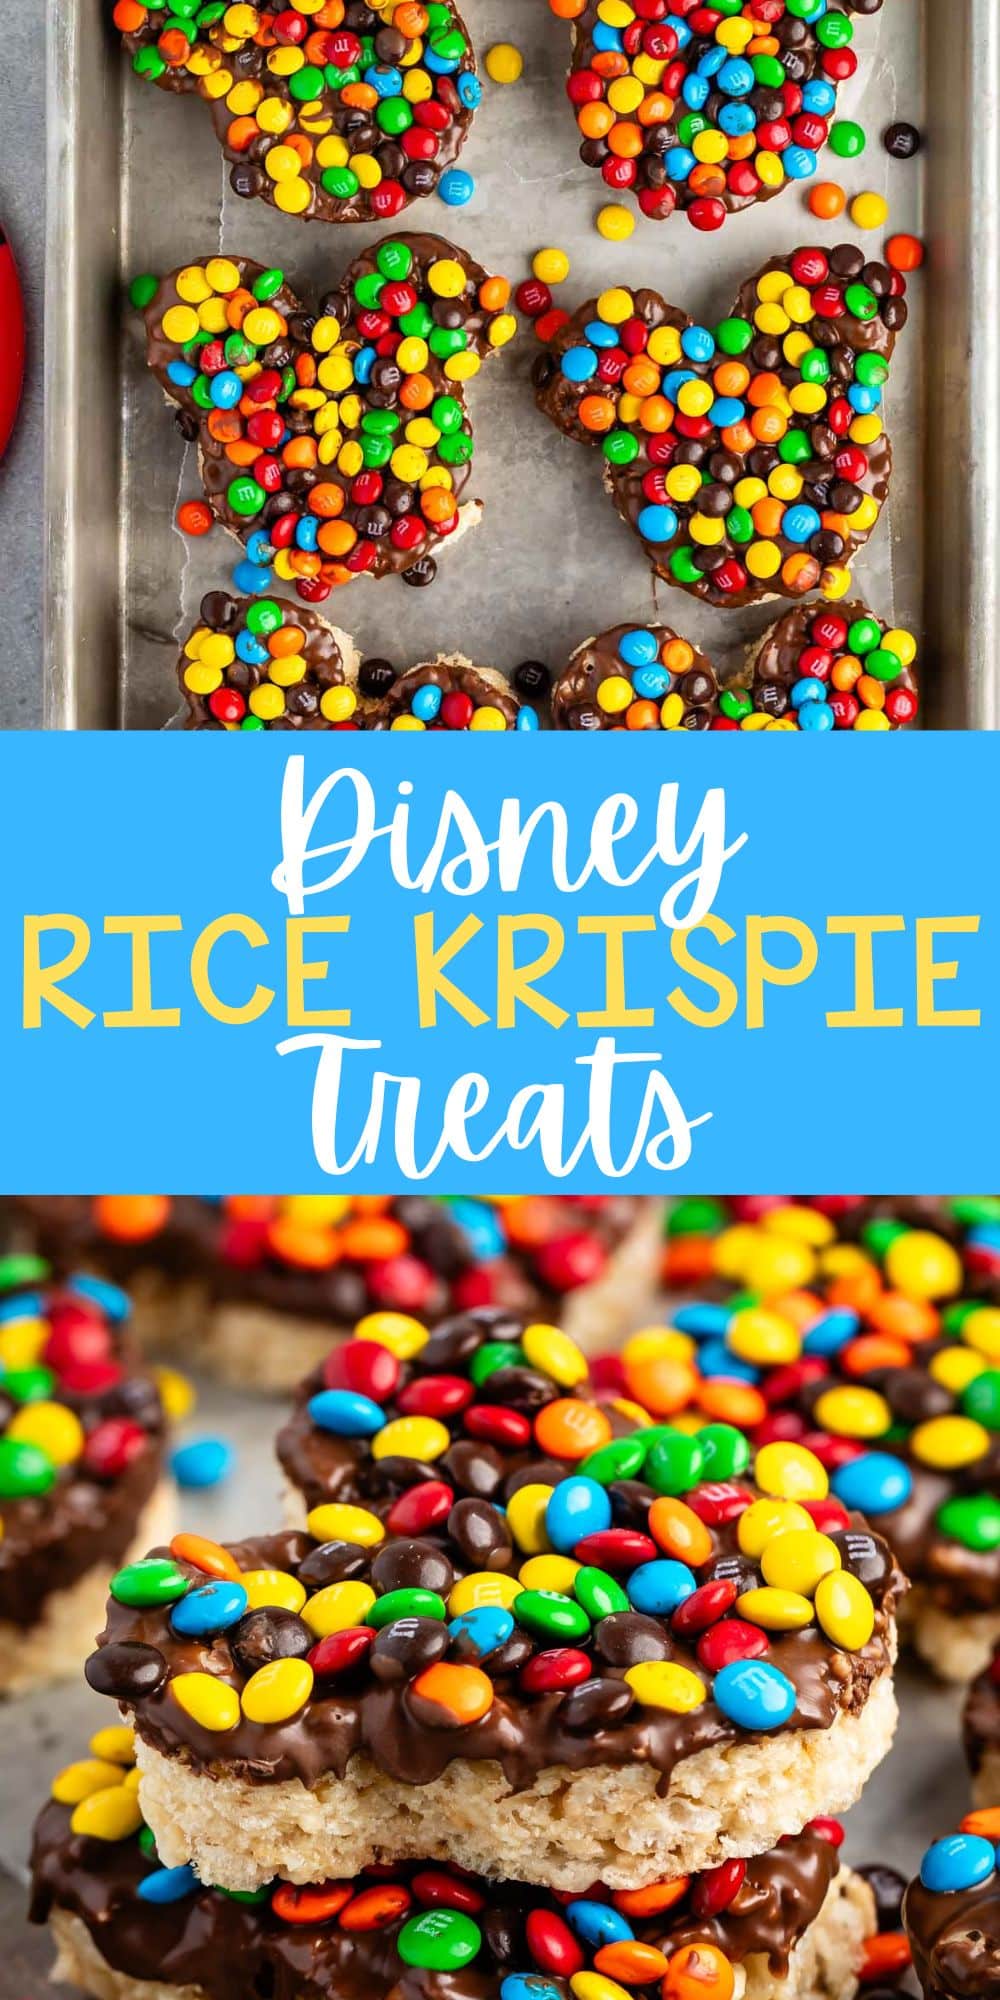 two photos of Mickey Mouse shaped Rice Krispie treats covered in chocolate and colorful M&Ms with words on the image.